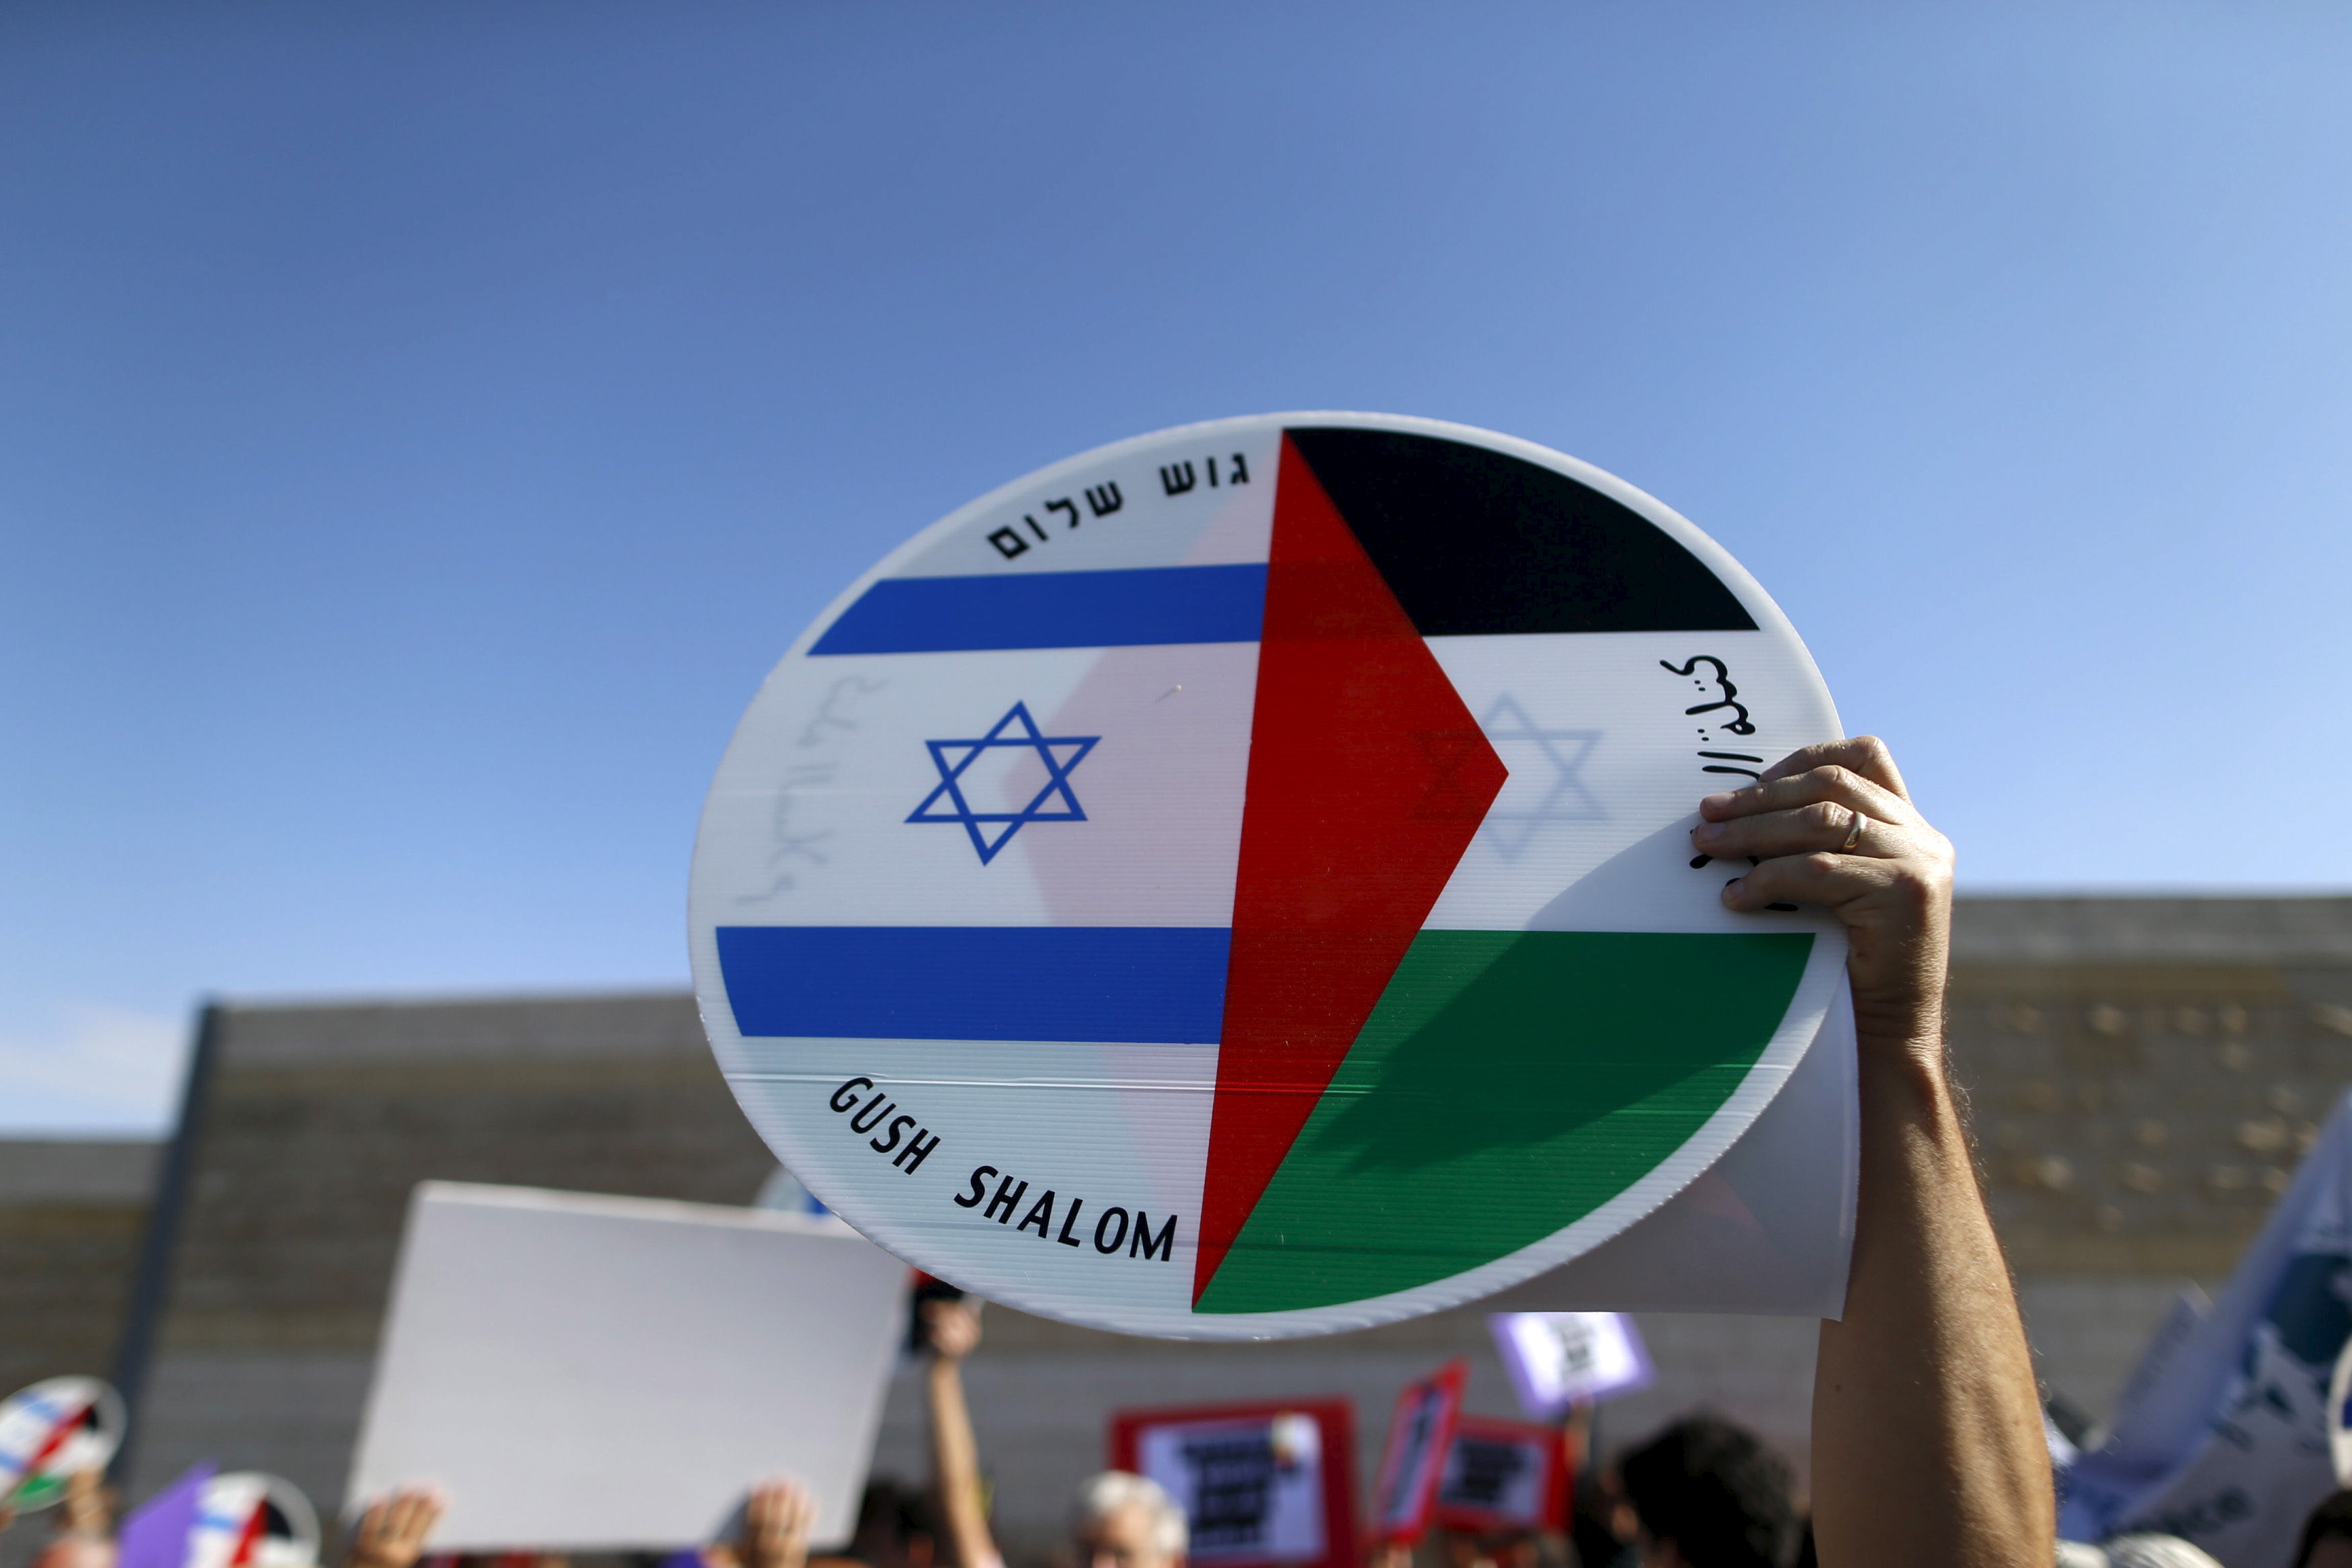 Only one way out: a unitary state with equal rights in Palestine-Israel